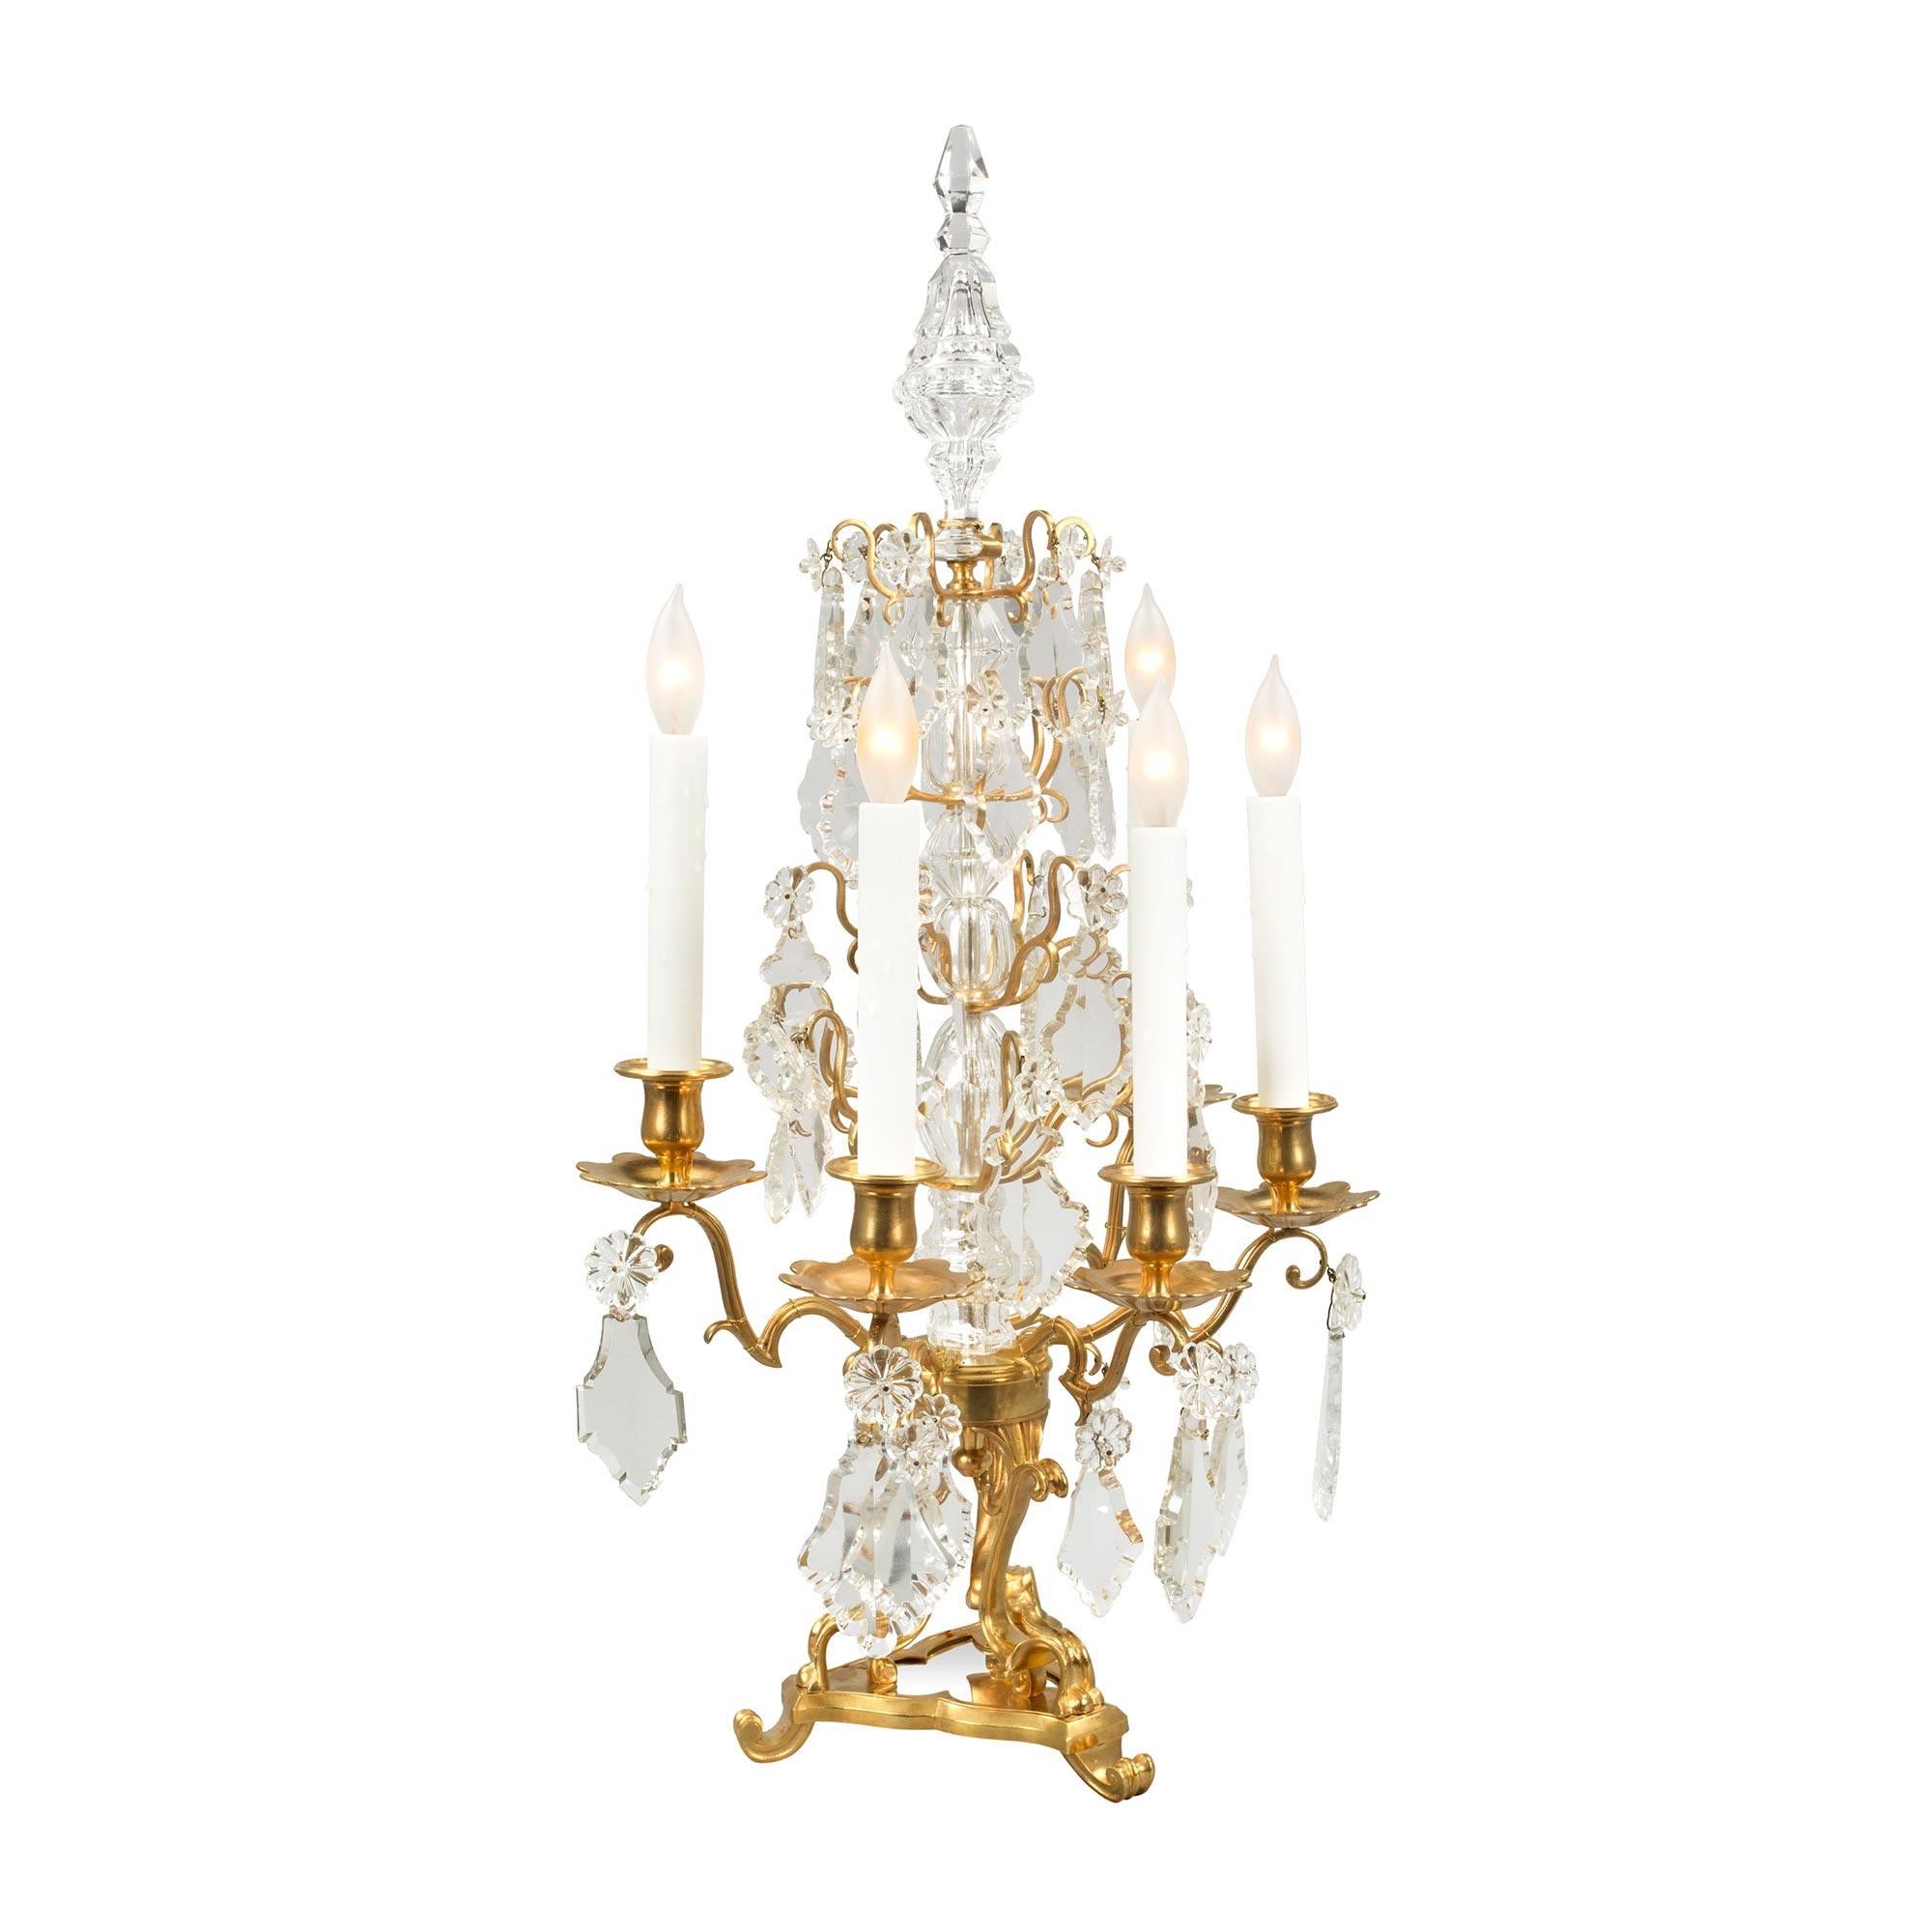 An elegant pair of French 19th century Louis XV st. ormolu and Baccarat Girandoles. Each lamp is raised by a fine triangular ormolu base with most decorative scrolled feet and scrolled supports, centering a silvered bronze base. Each arm displays